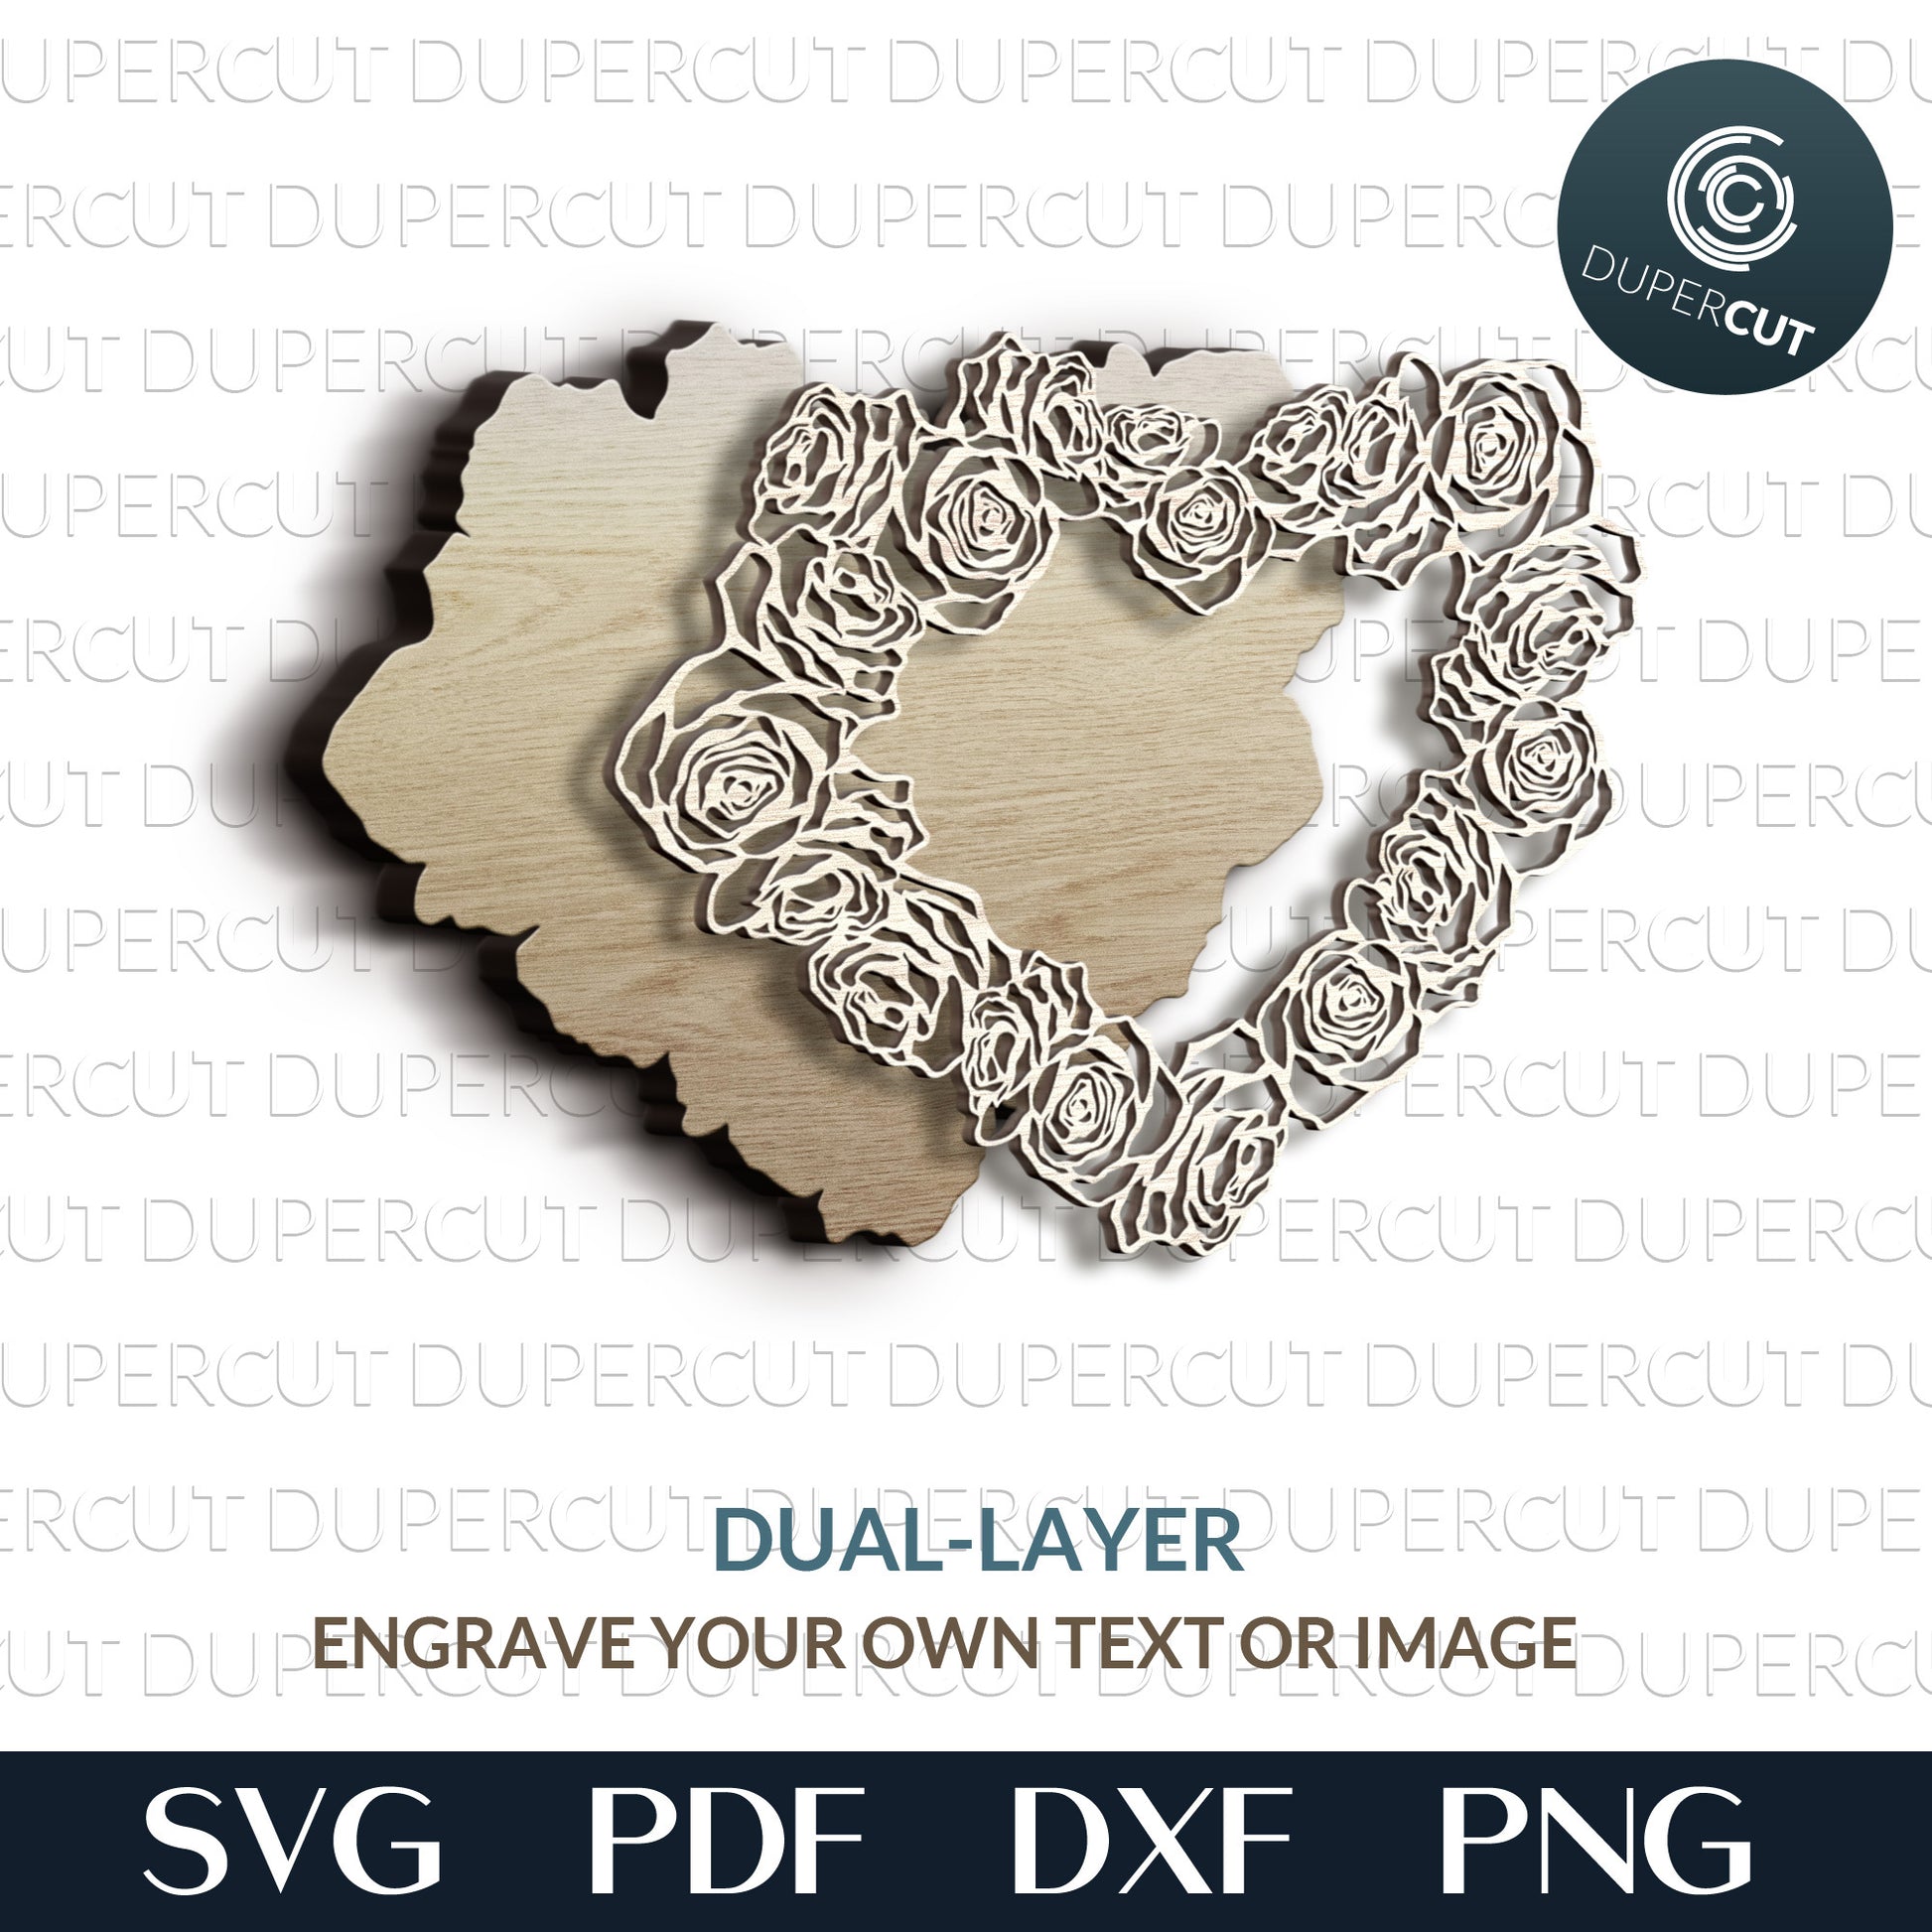 Valentines Heart shaped rose wreath layered files - SVG PDF DXF template for laser cutting and engraving, Glowforge, Cricut, Silhouette Cameo, CNC plasma machines